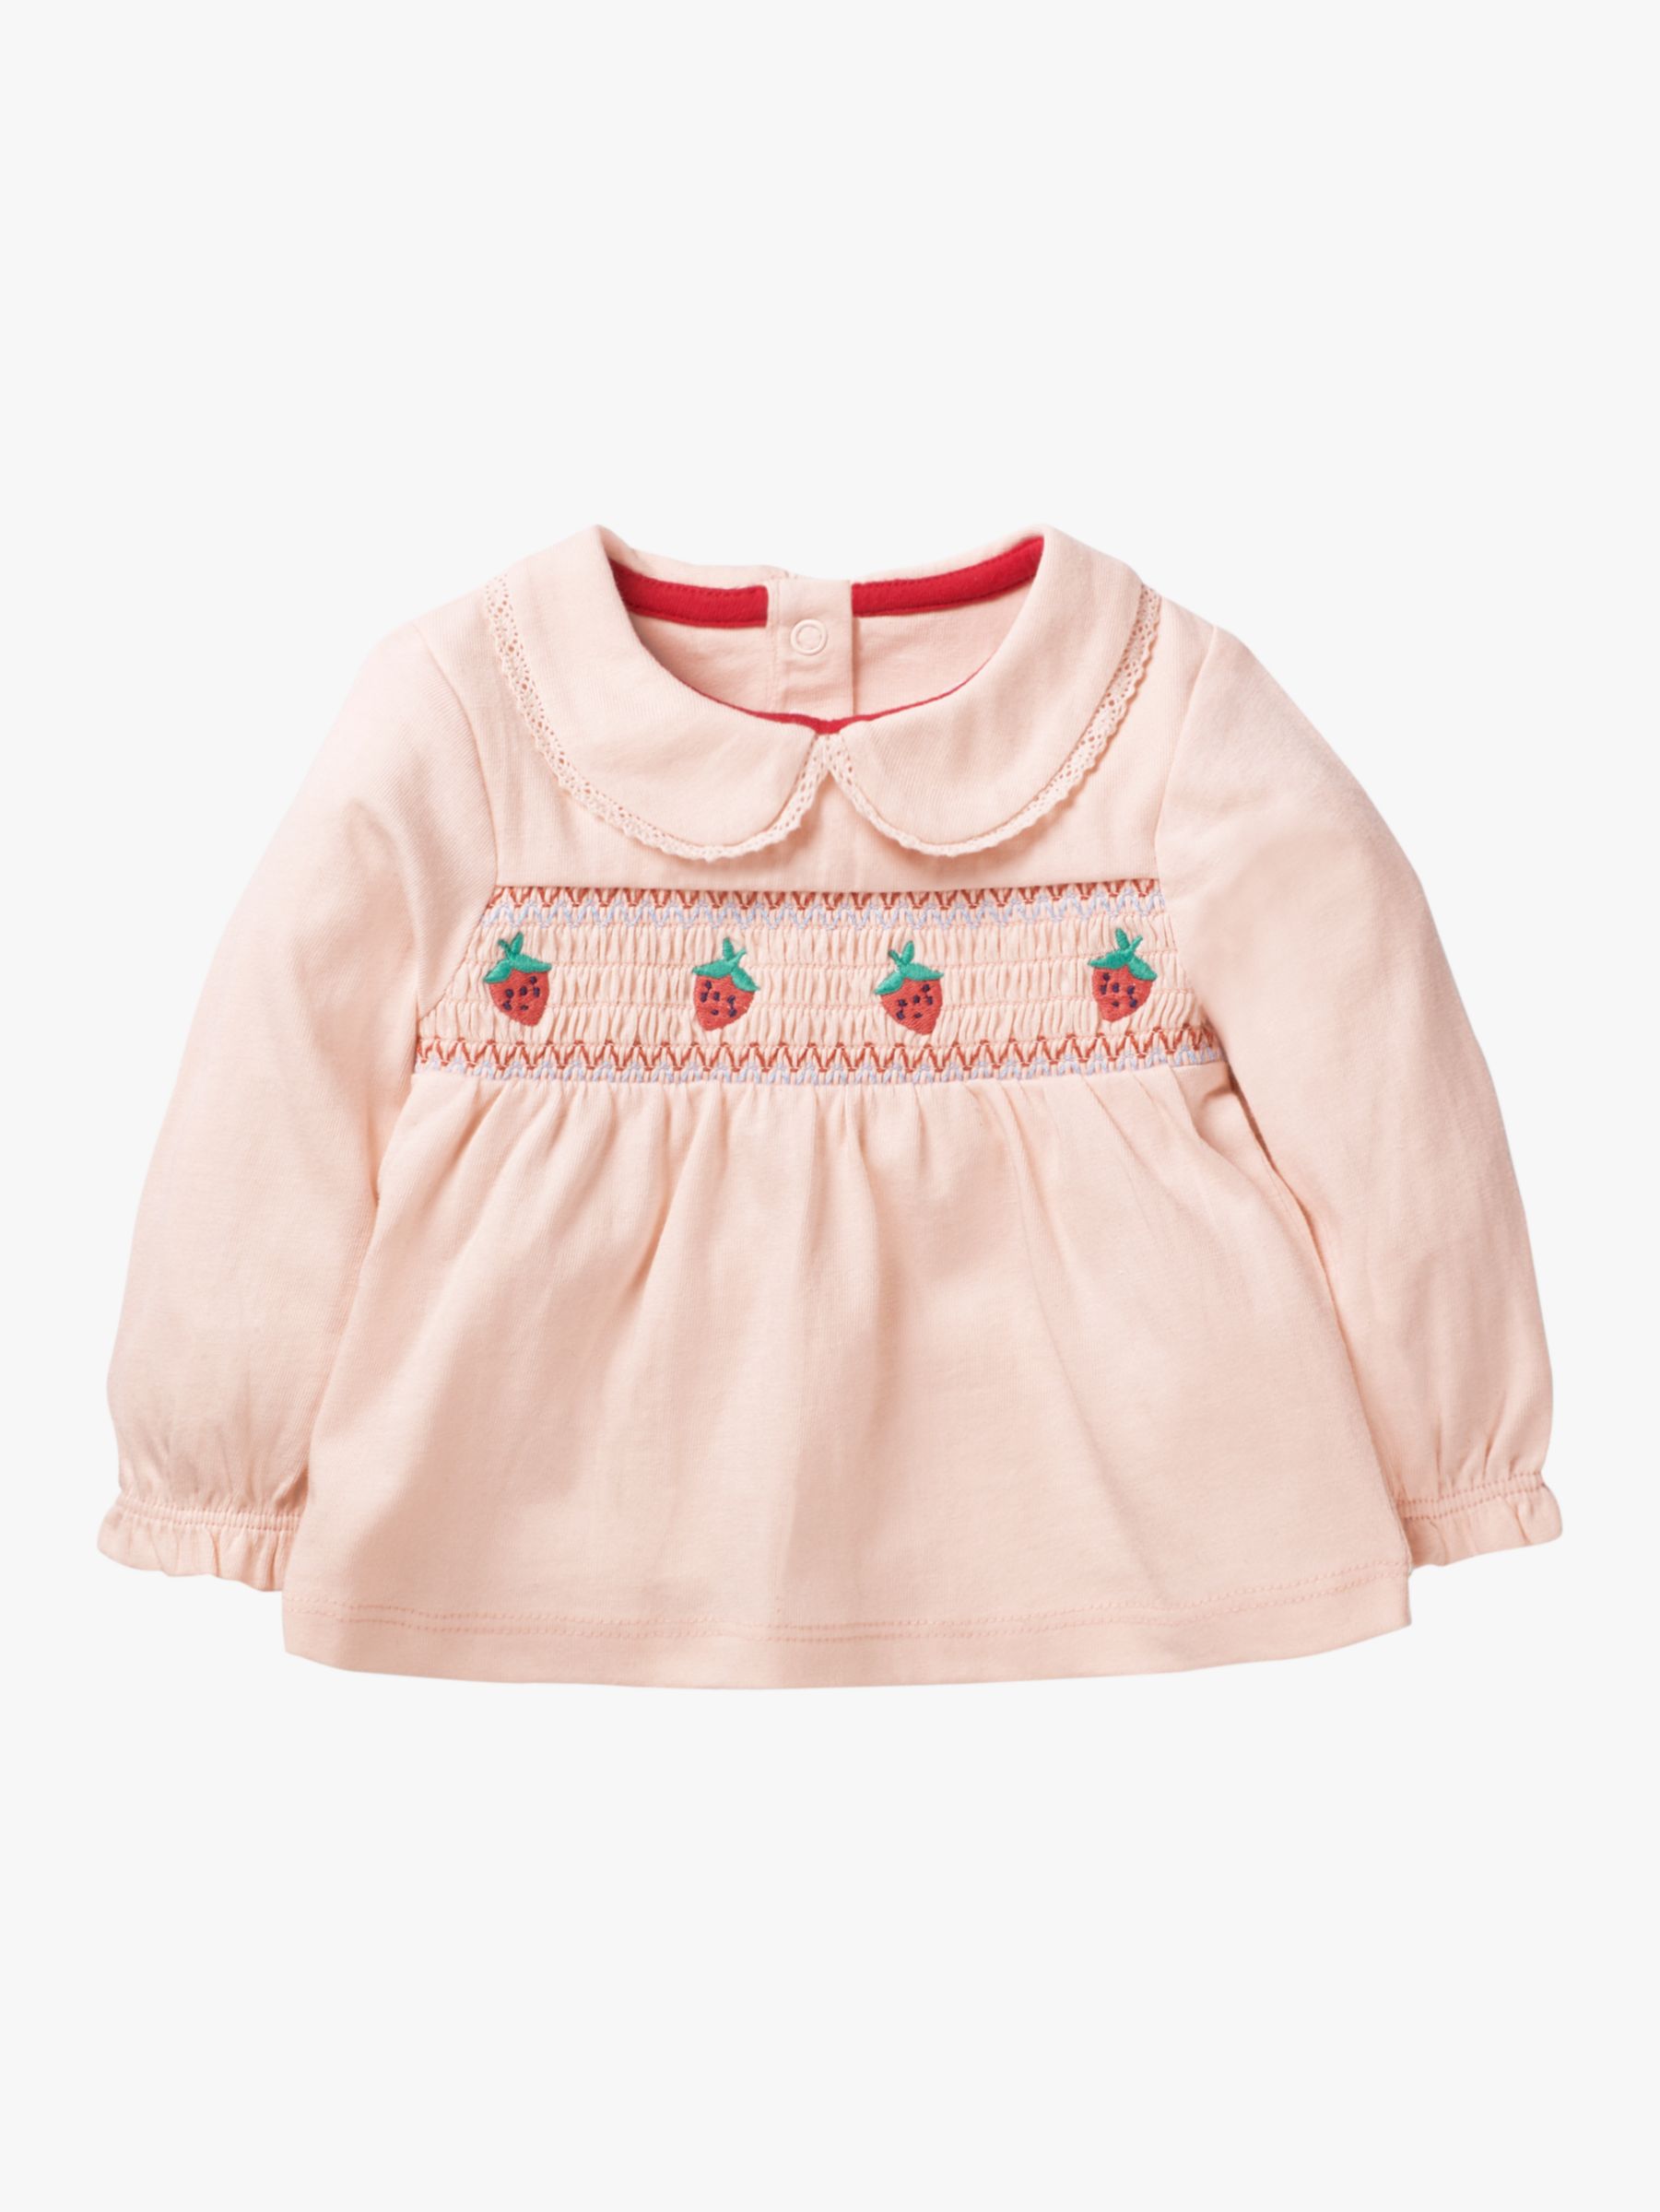 NEW Mini Boden Pink Baby Strawberry Embroidered Smock Parisian Top 